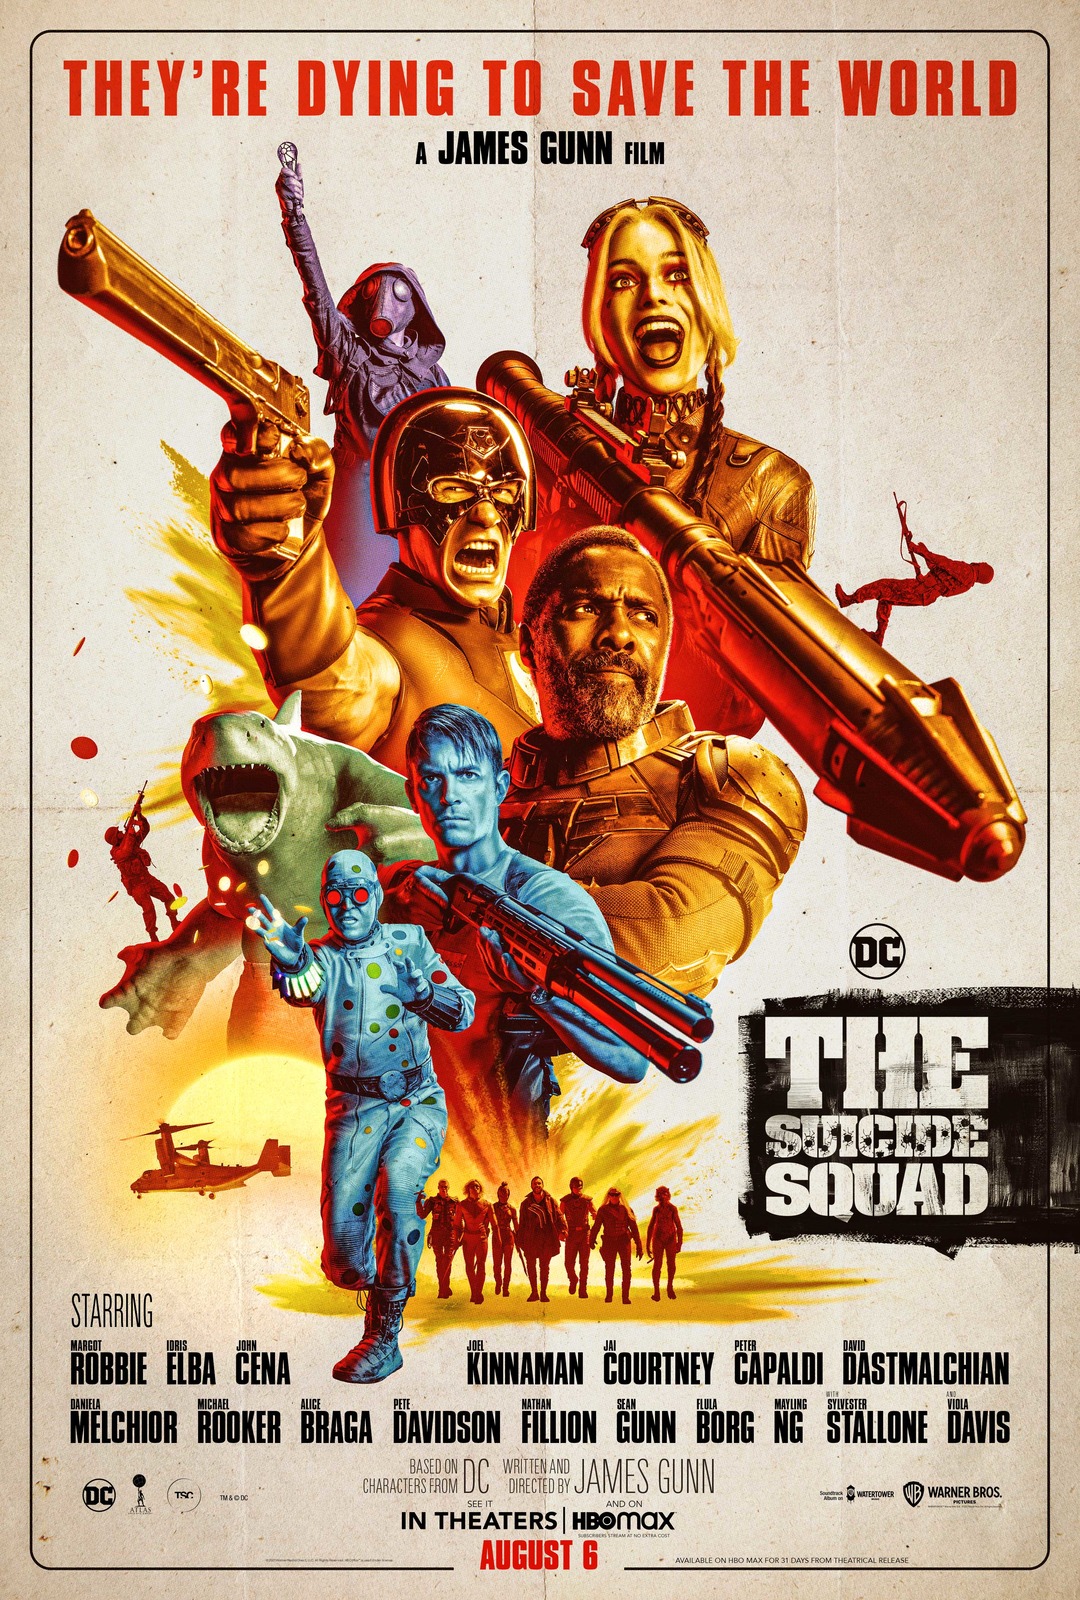 Poster for the sequel to the Sourside Squad